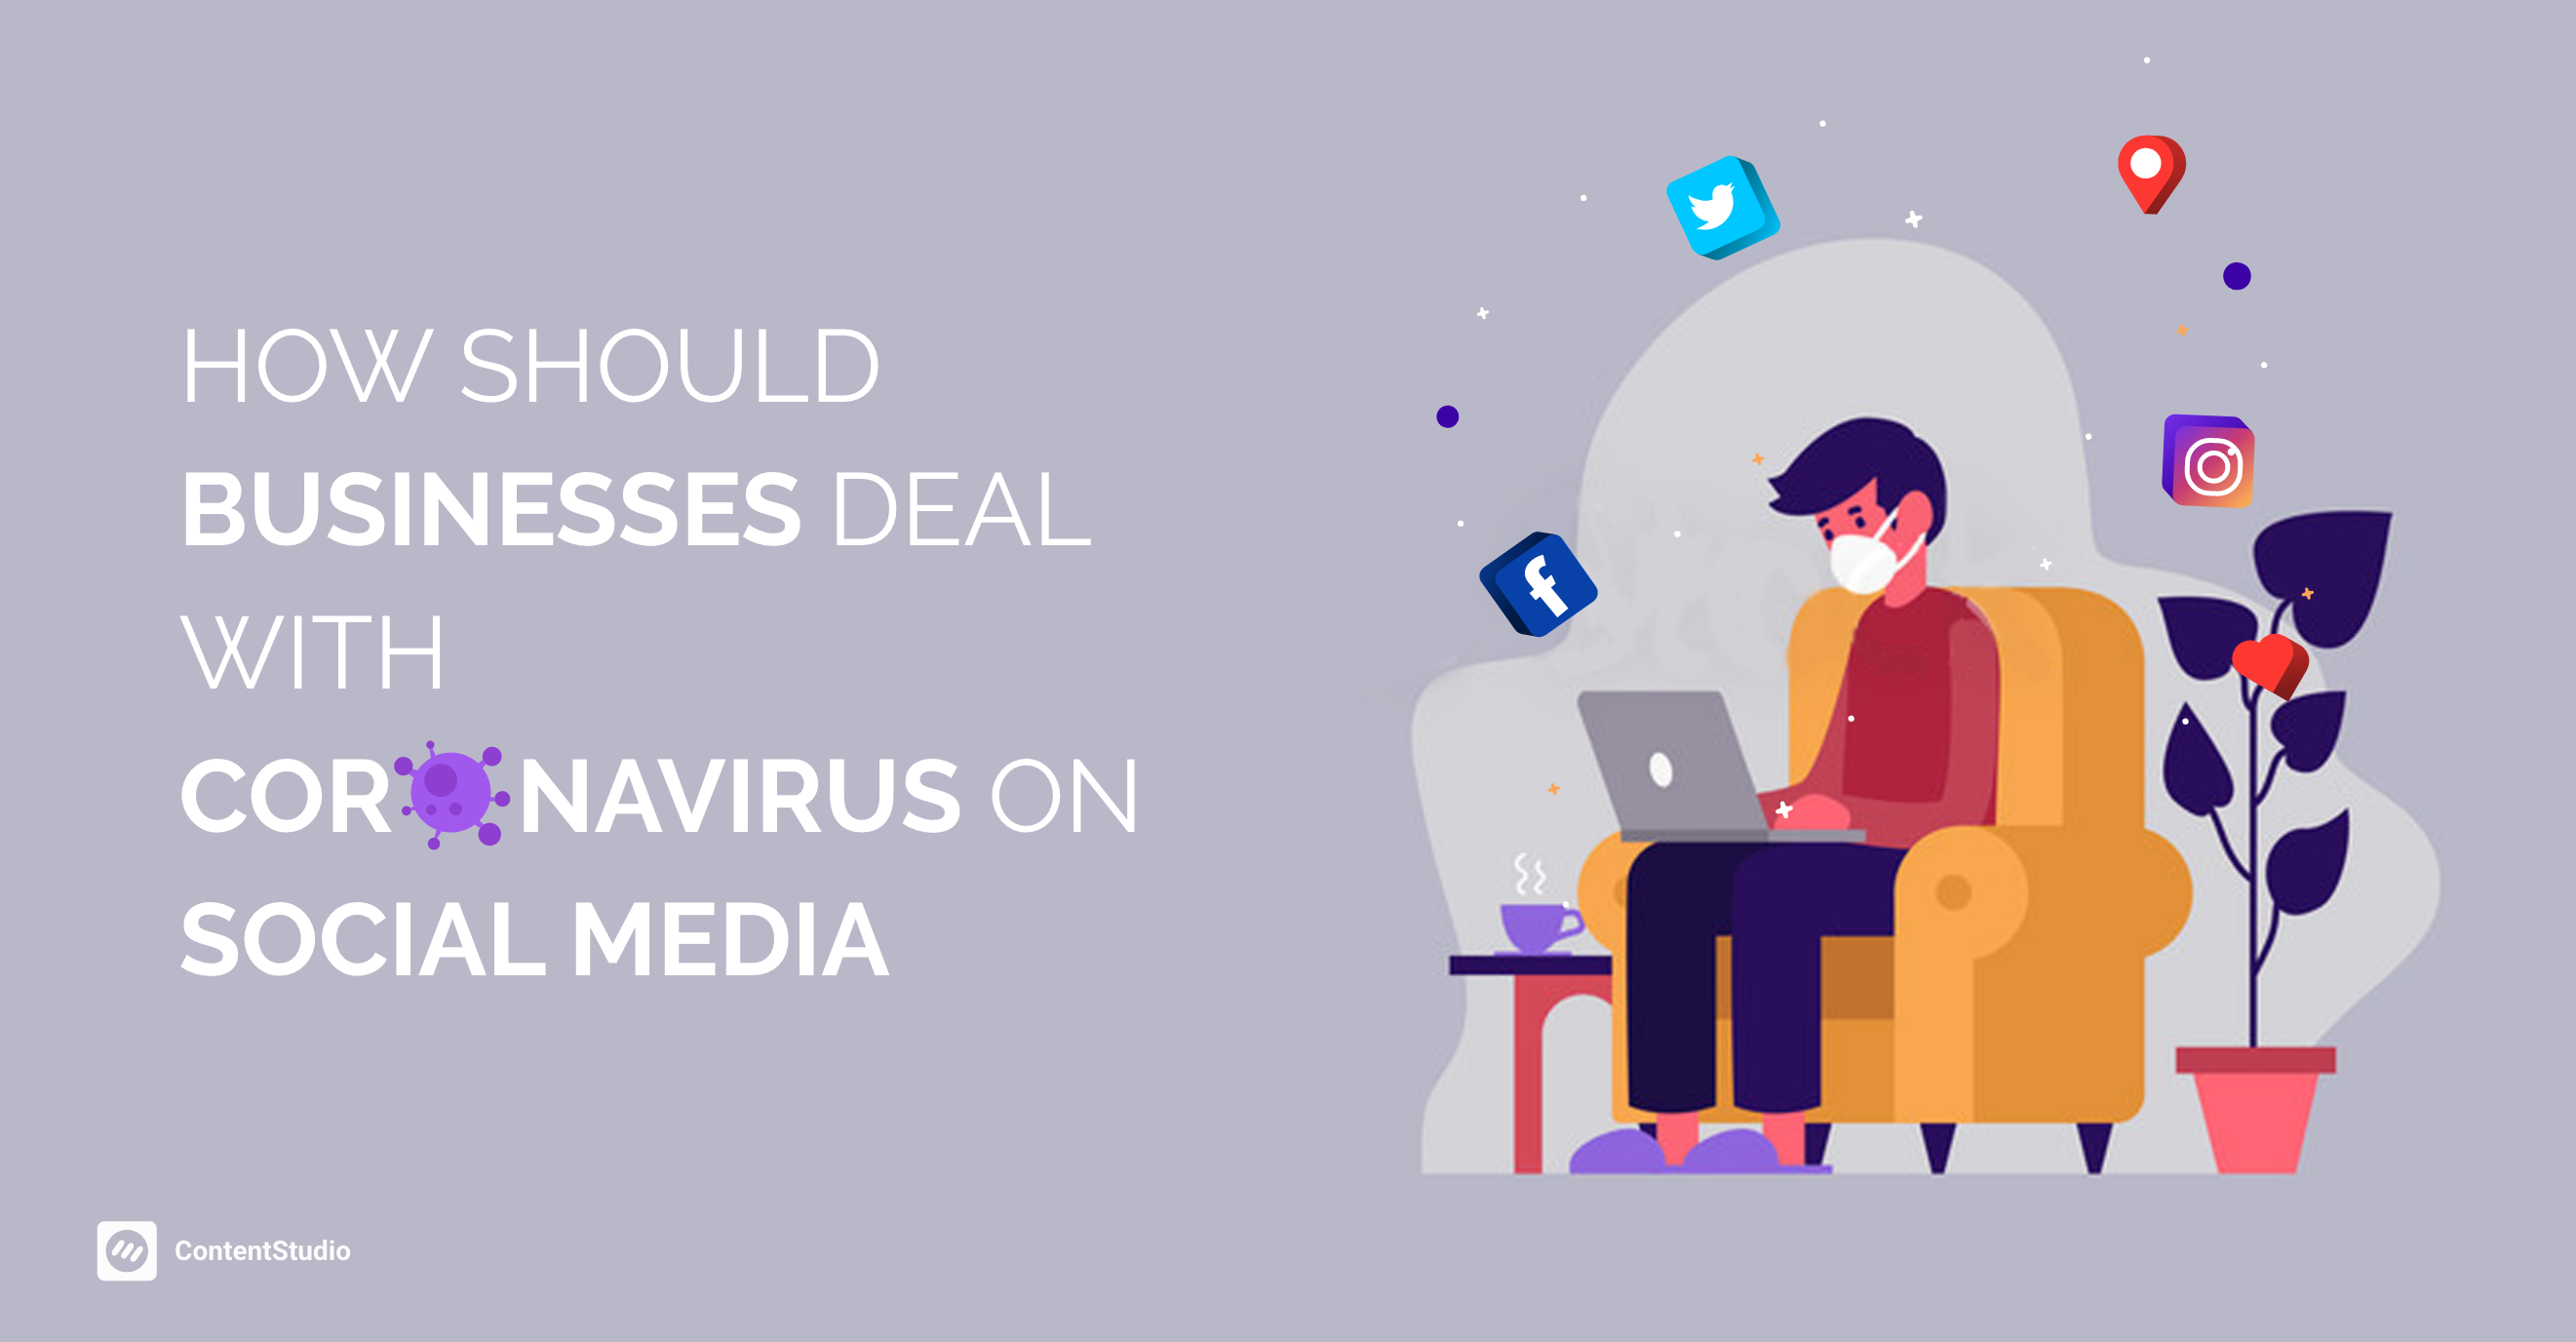 How Should Businesses Deal With CoronaVirus on Social Media